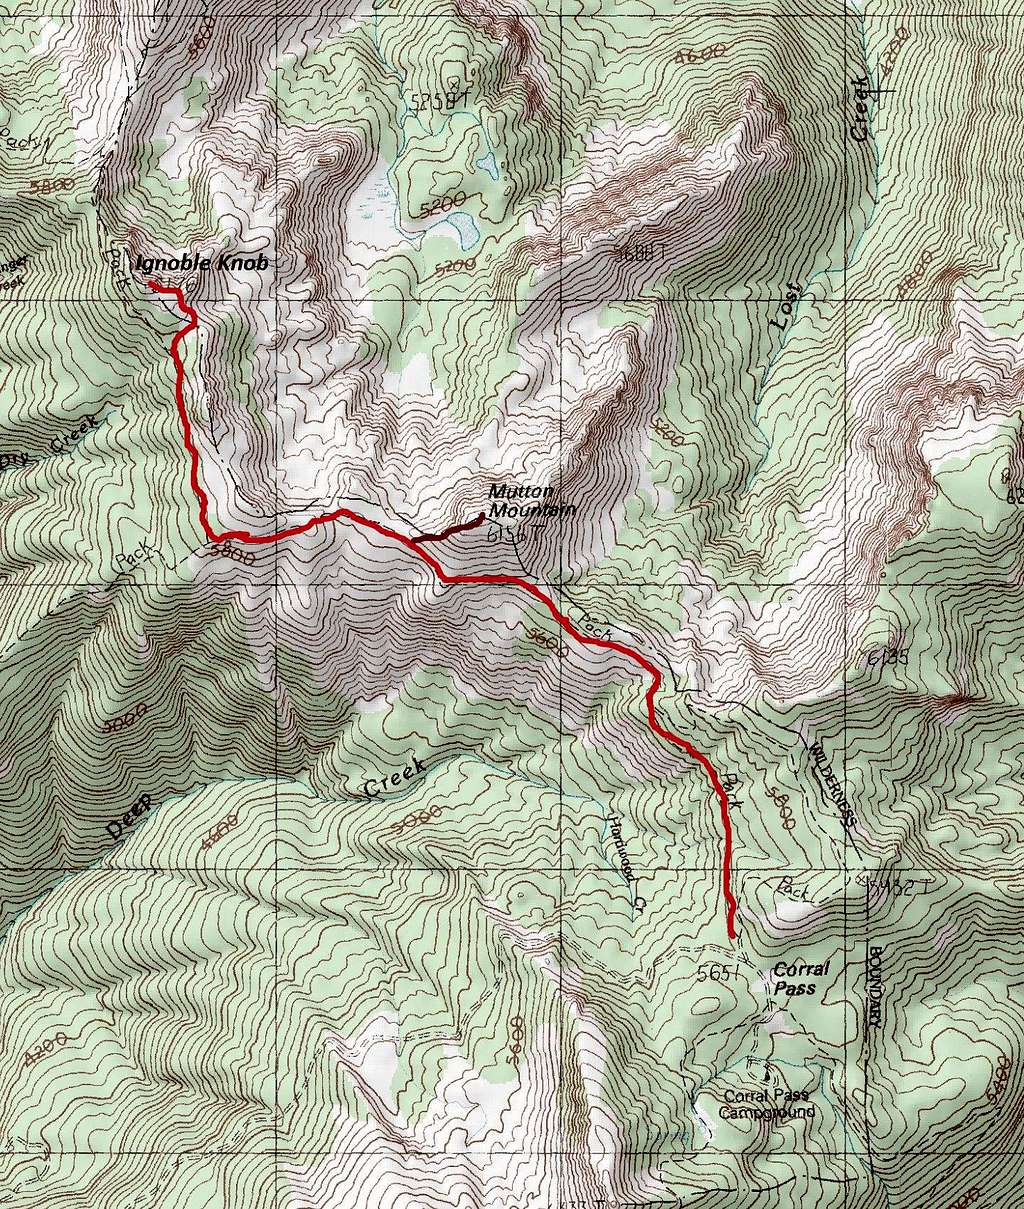 Ignoble Knob Summer Route (May not be open until fire debris cleared)